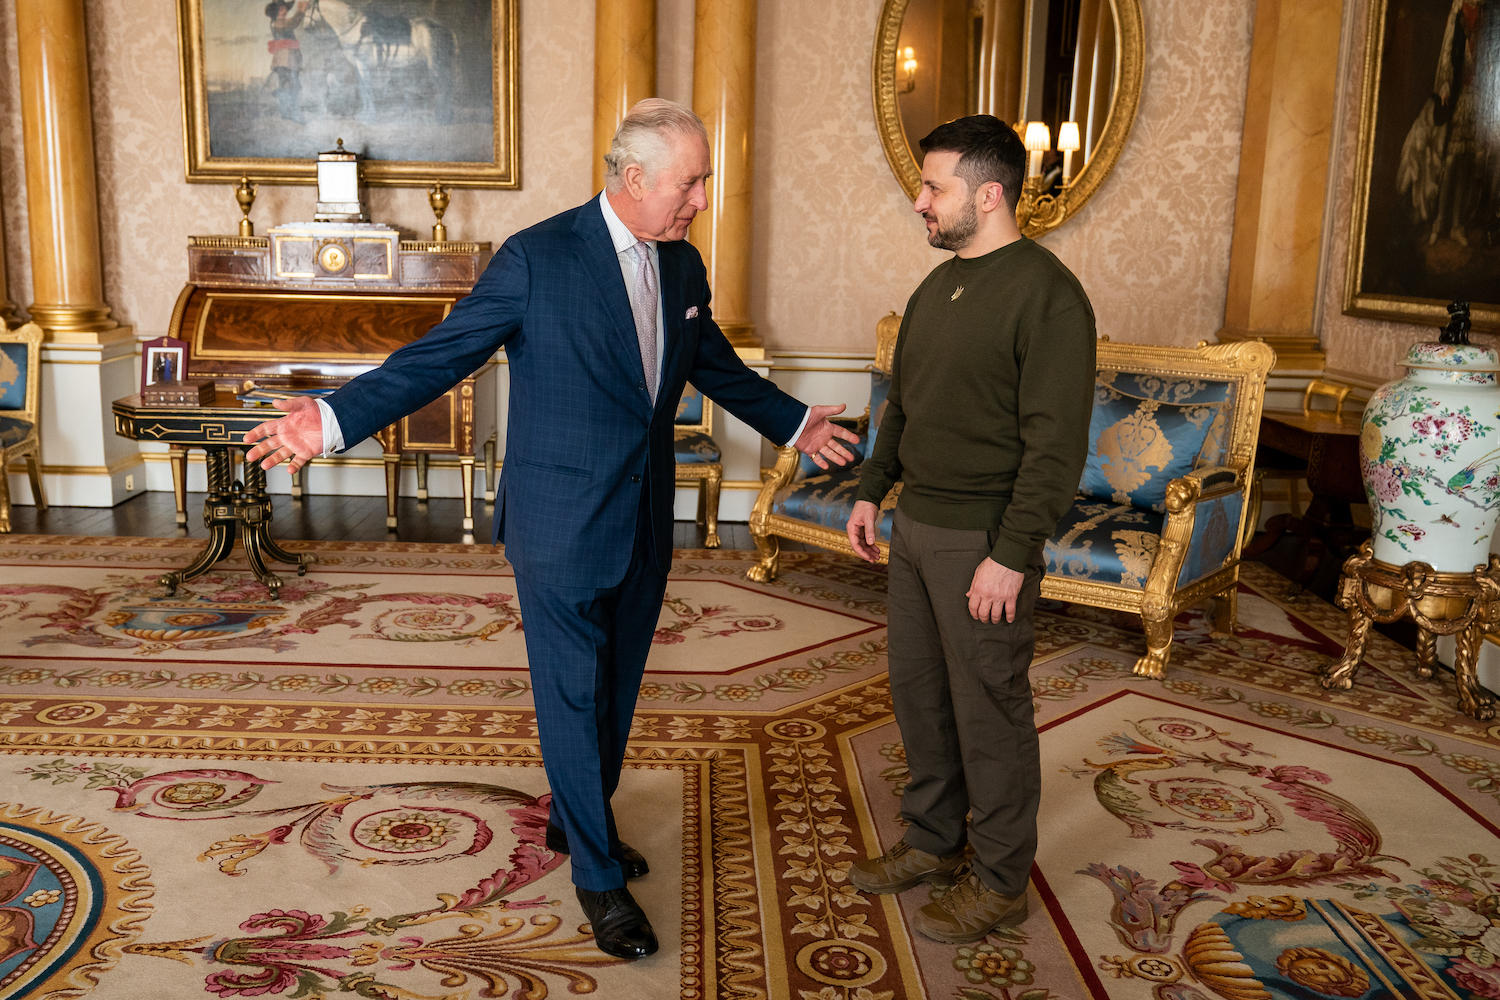 King Charles body language with Ukrainian President Volodymyr Zelensky as he welcomes him to Buckingham Palace